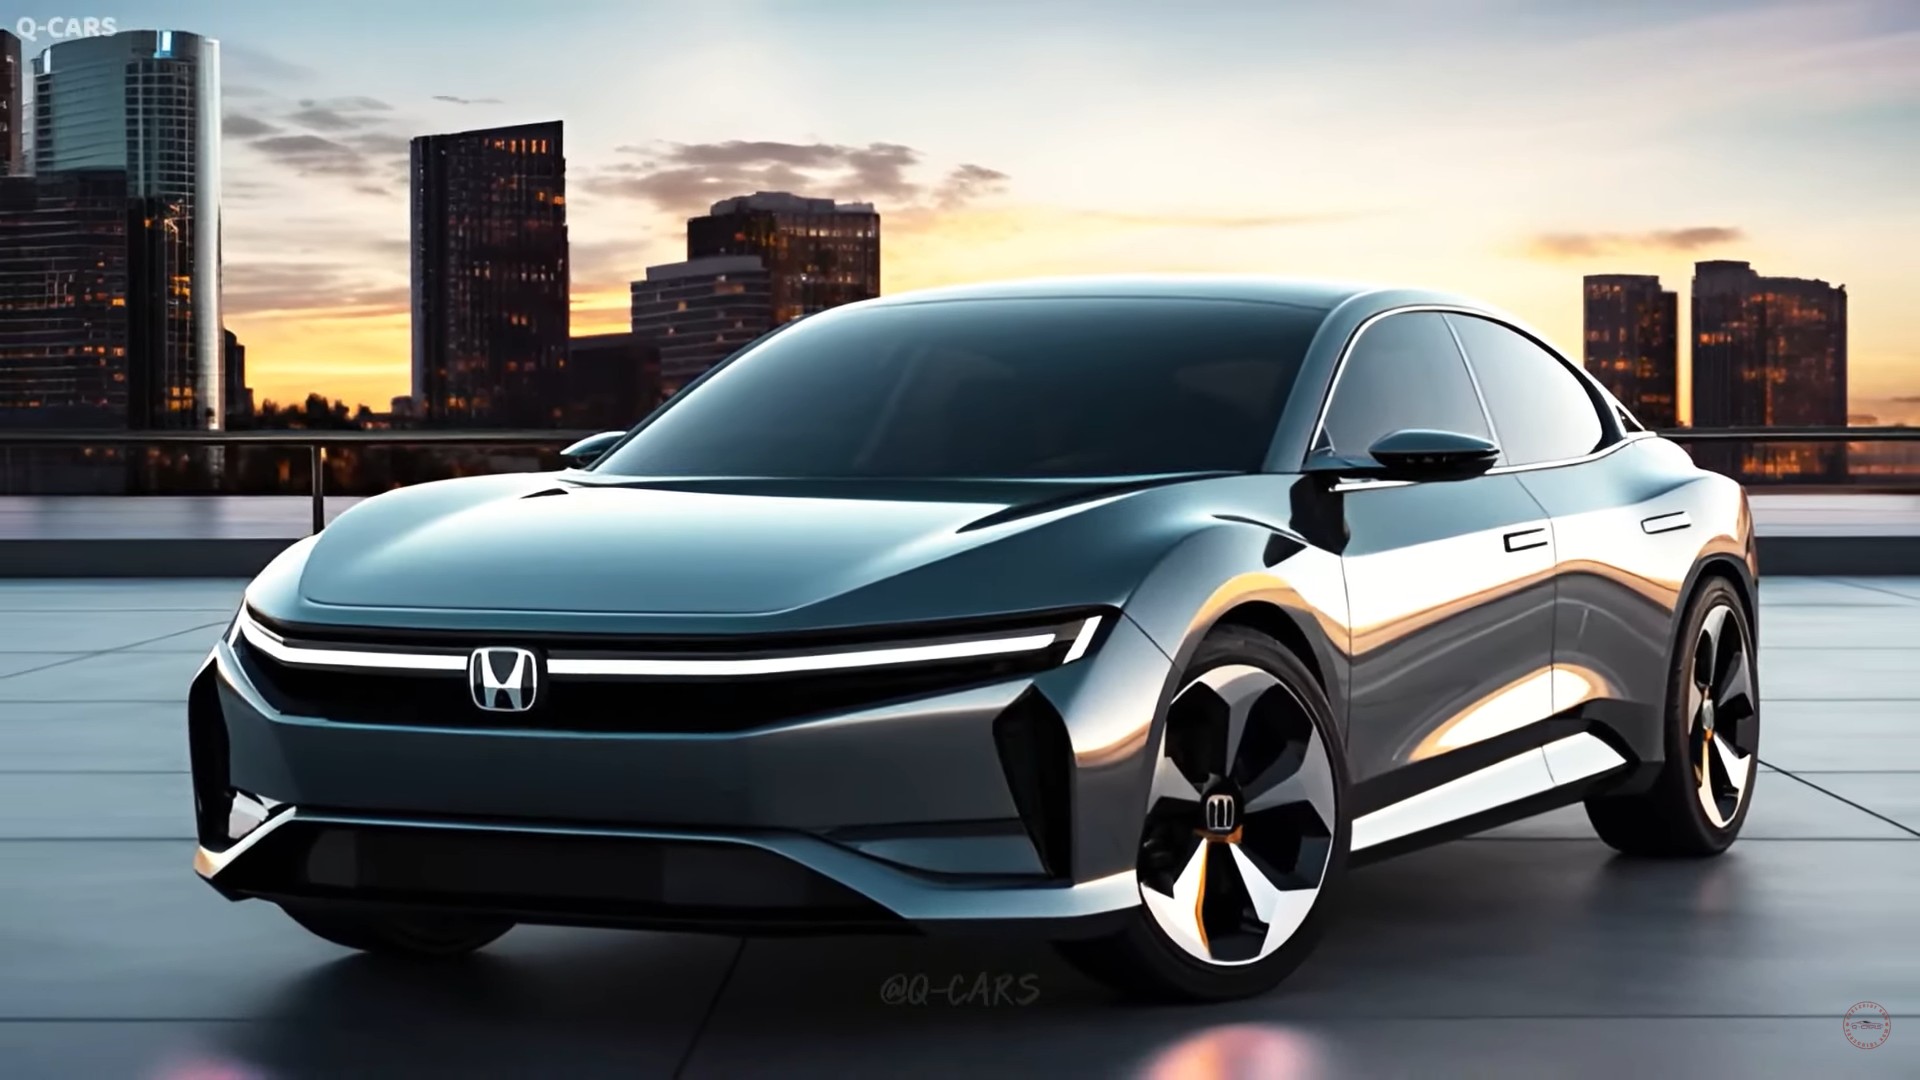 https://s1.cdn.autoevolution.com/images/news/redesigned-2025-honda-accord-aims-to-surprise-with-significant-virtual-design-changes-222083_1.jpg